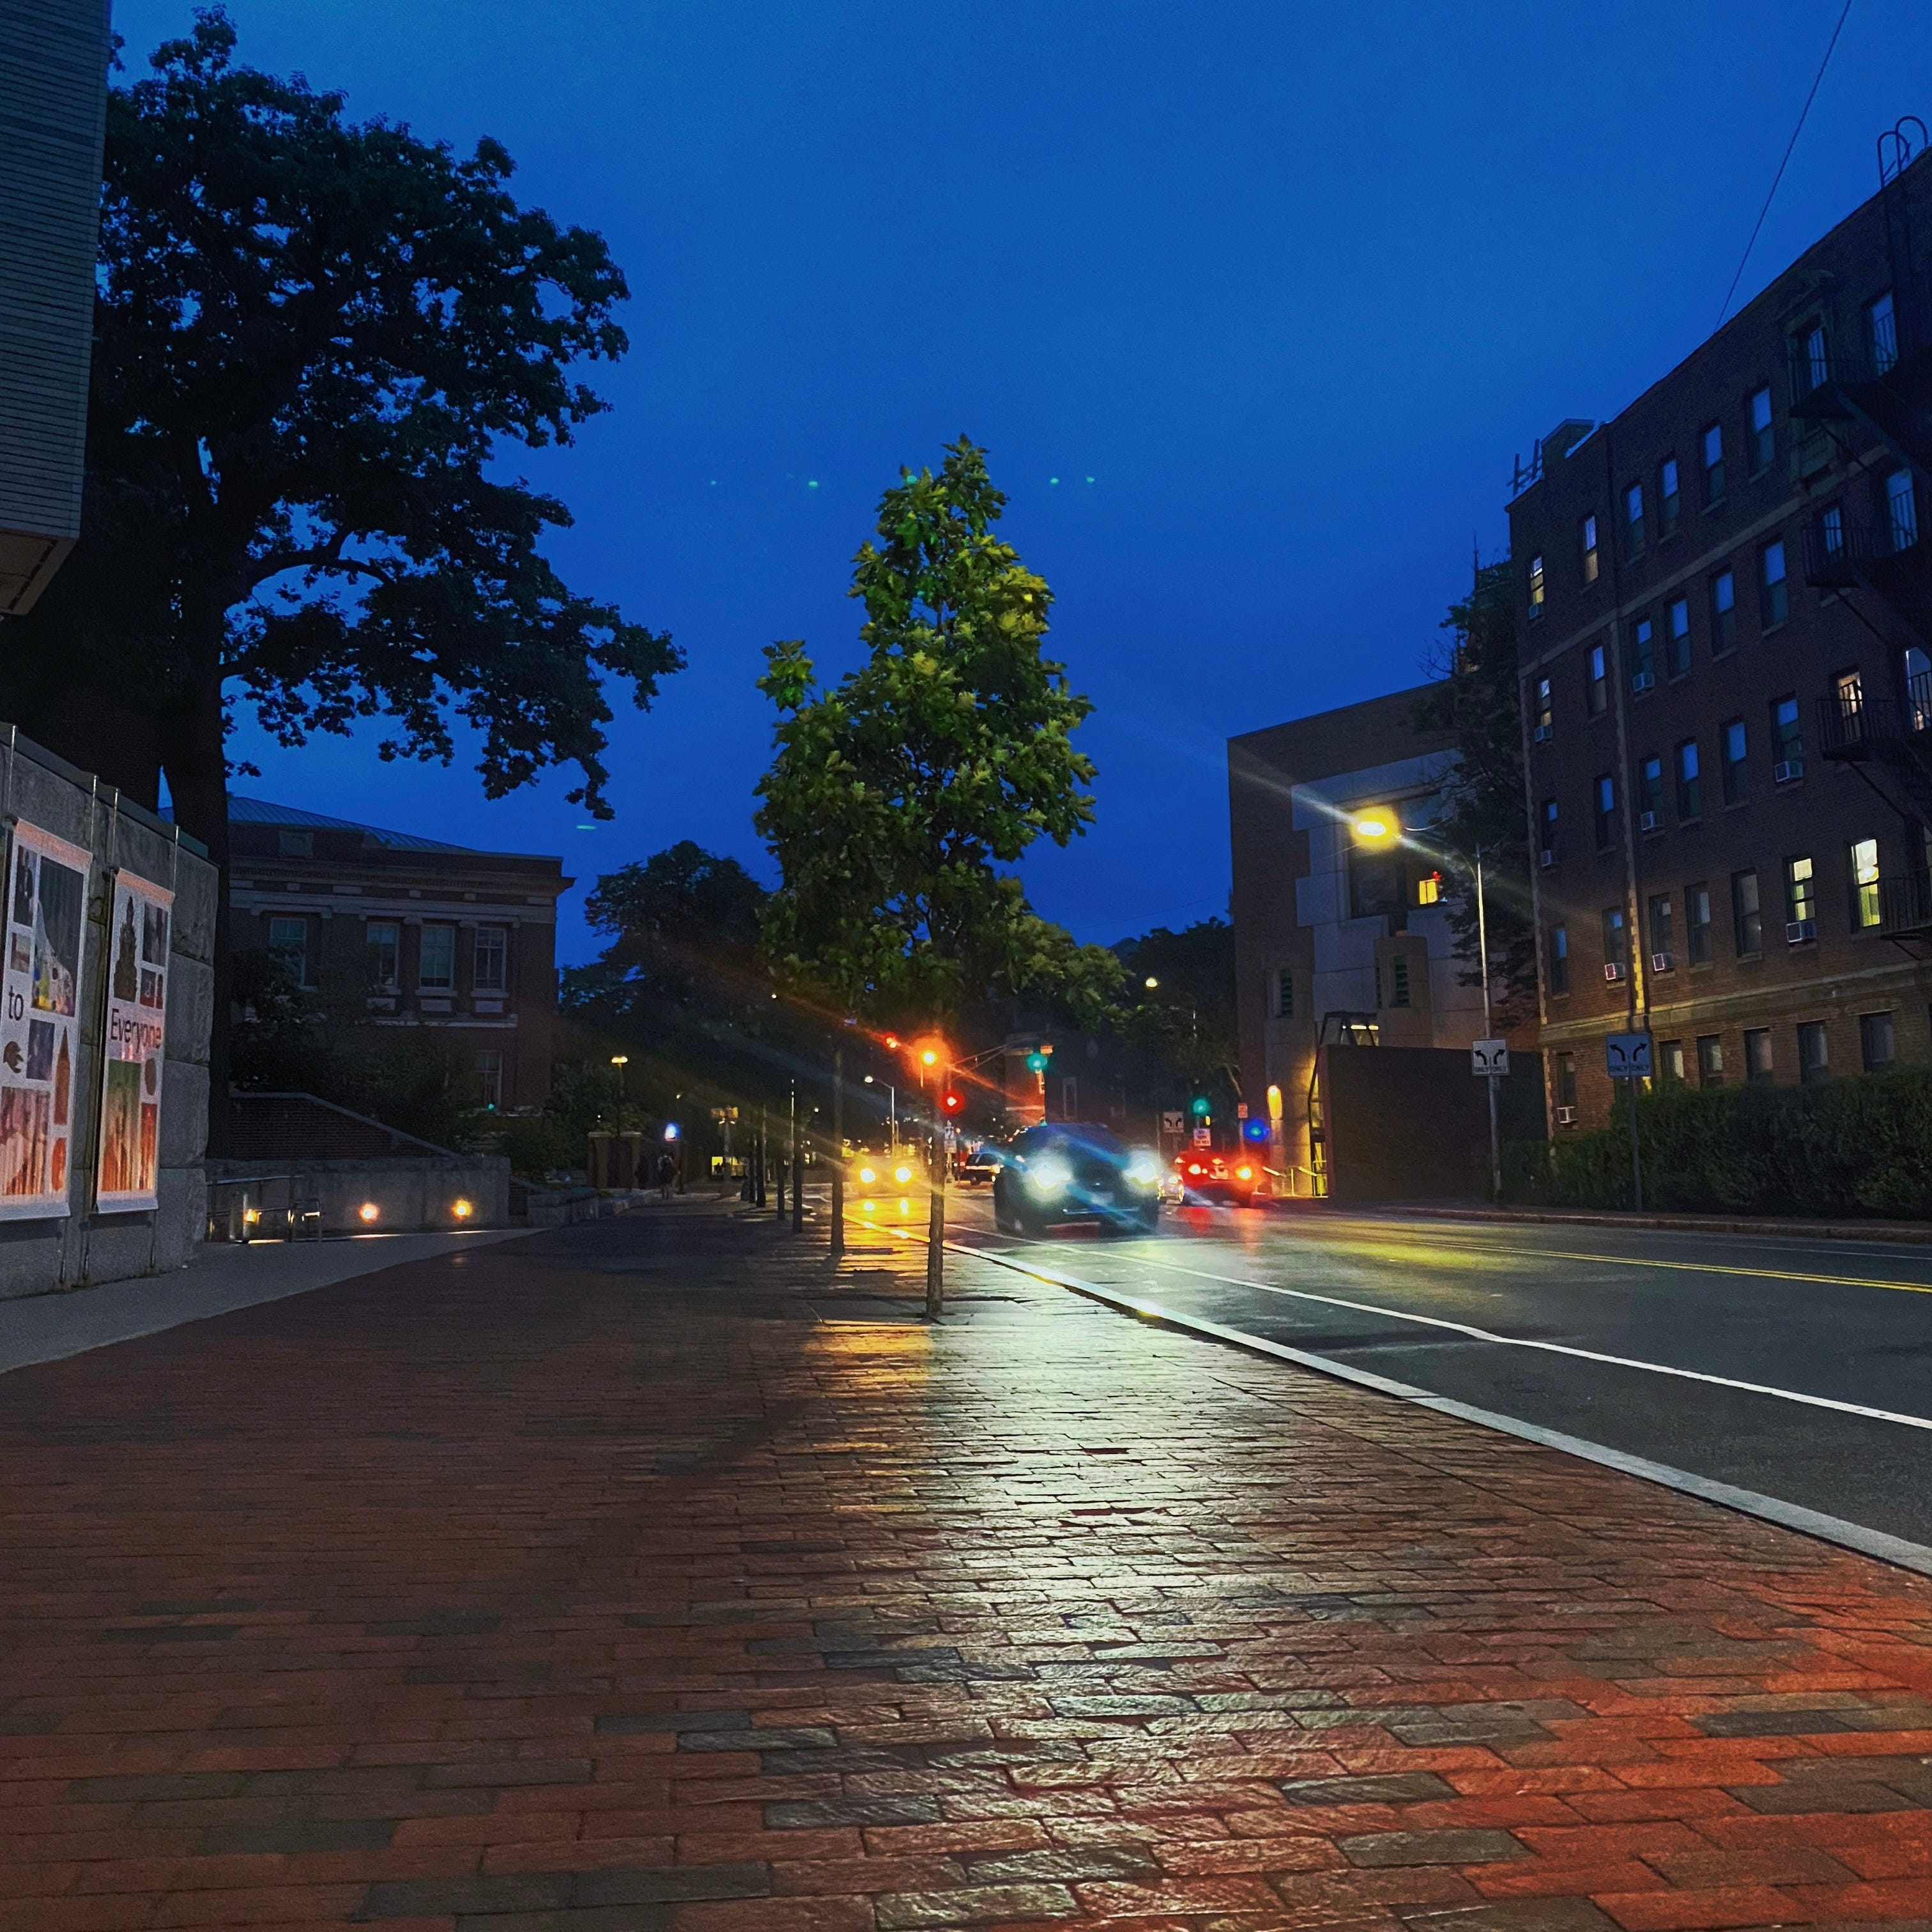 A picture I took between crying sessions next to the Harvard Art Museums. Shows the red brick payment and deep blue night sky as cars drive by.